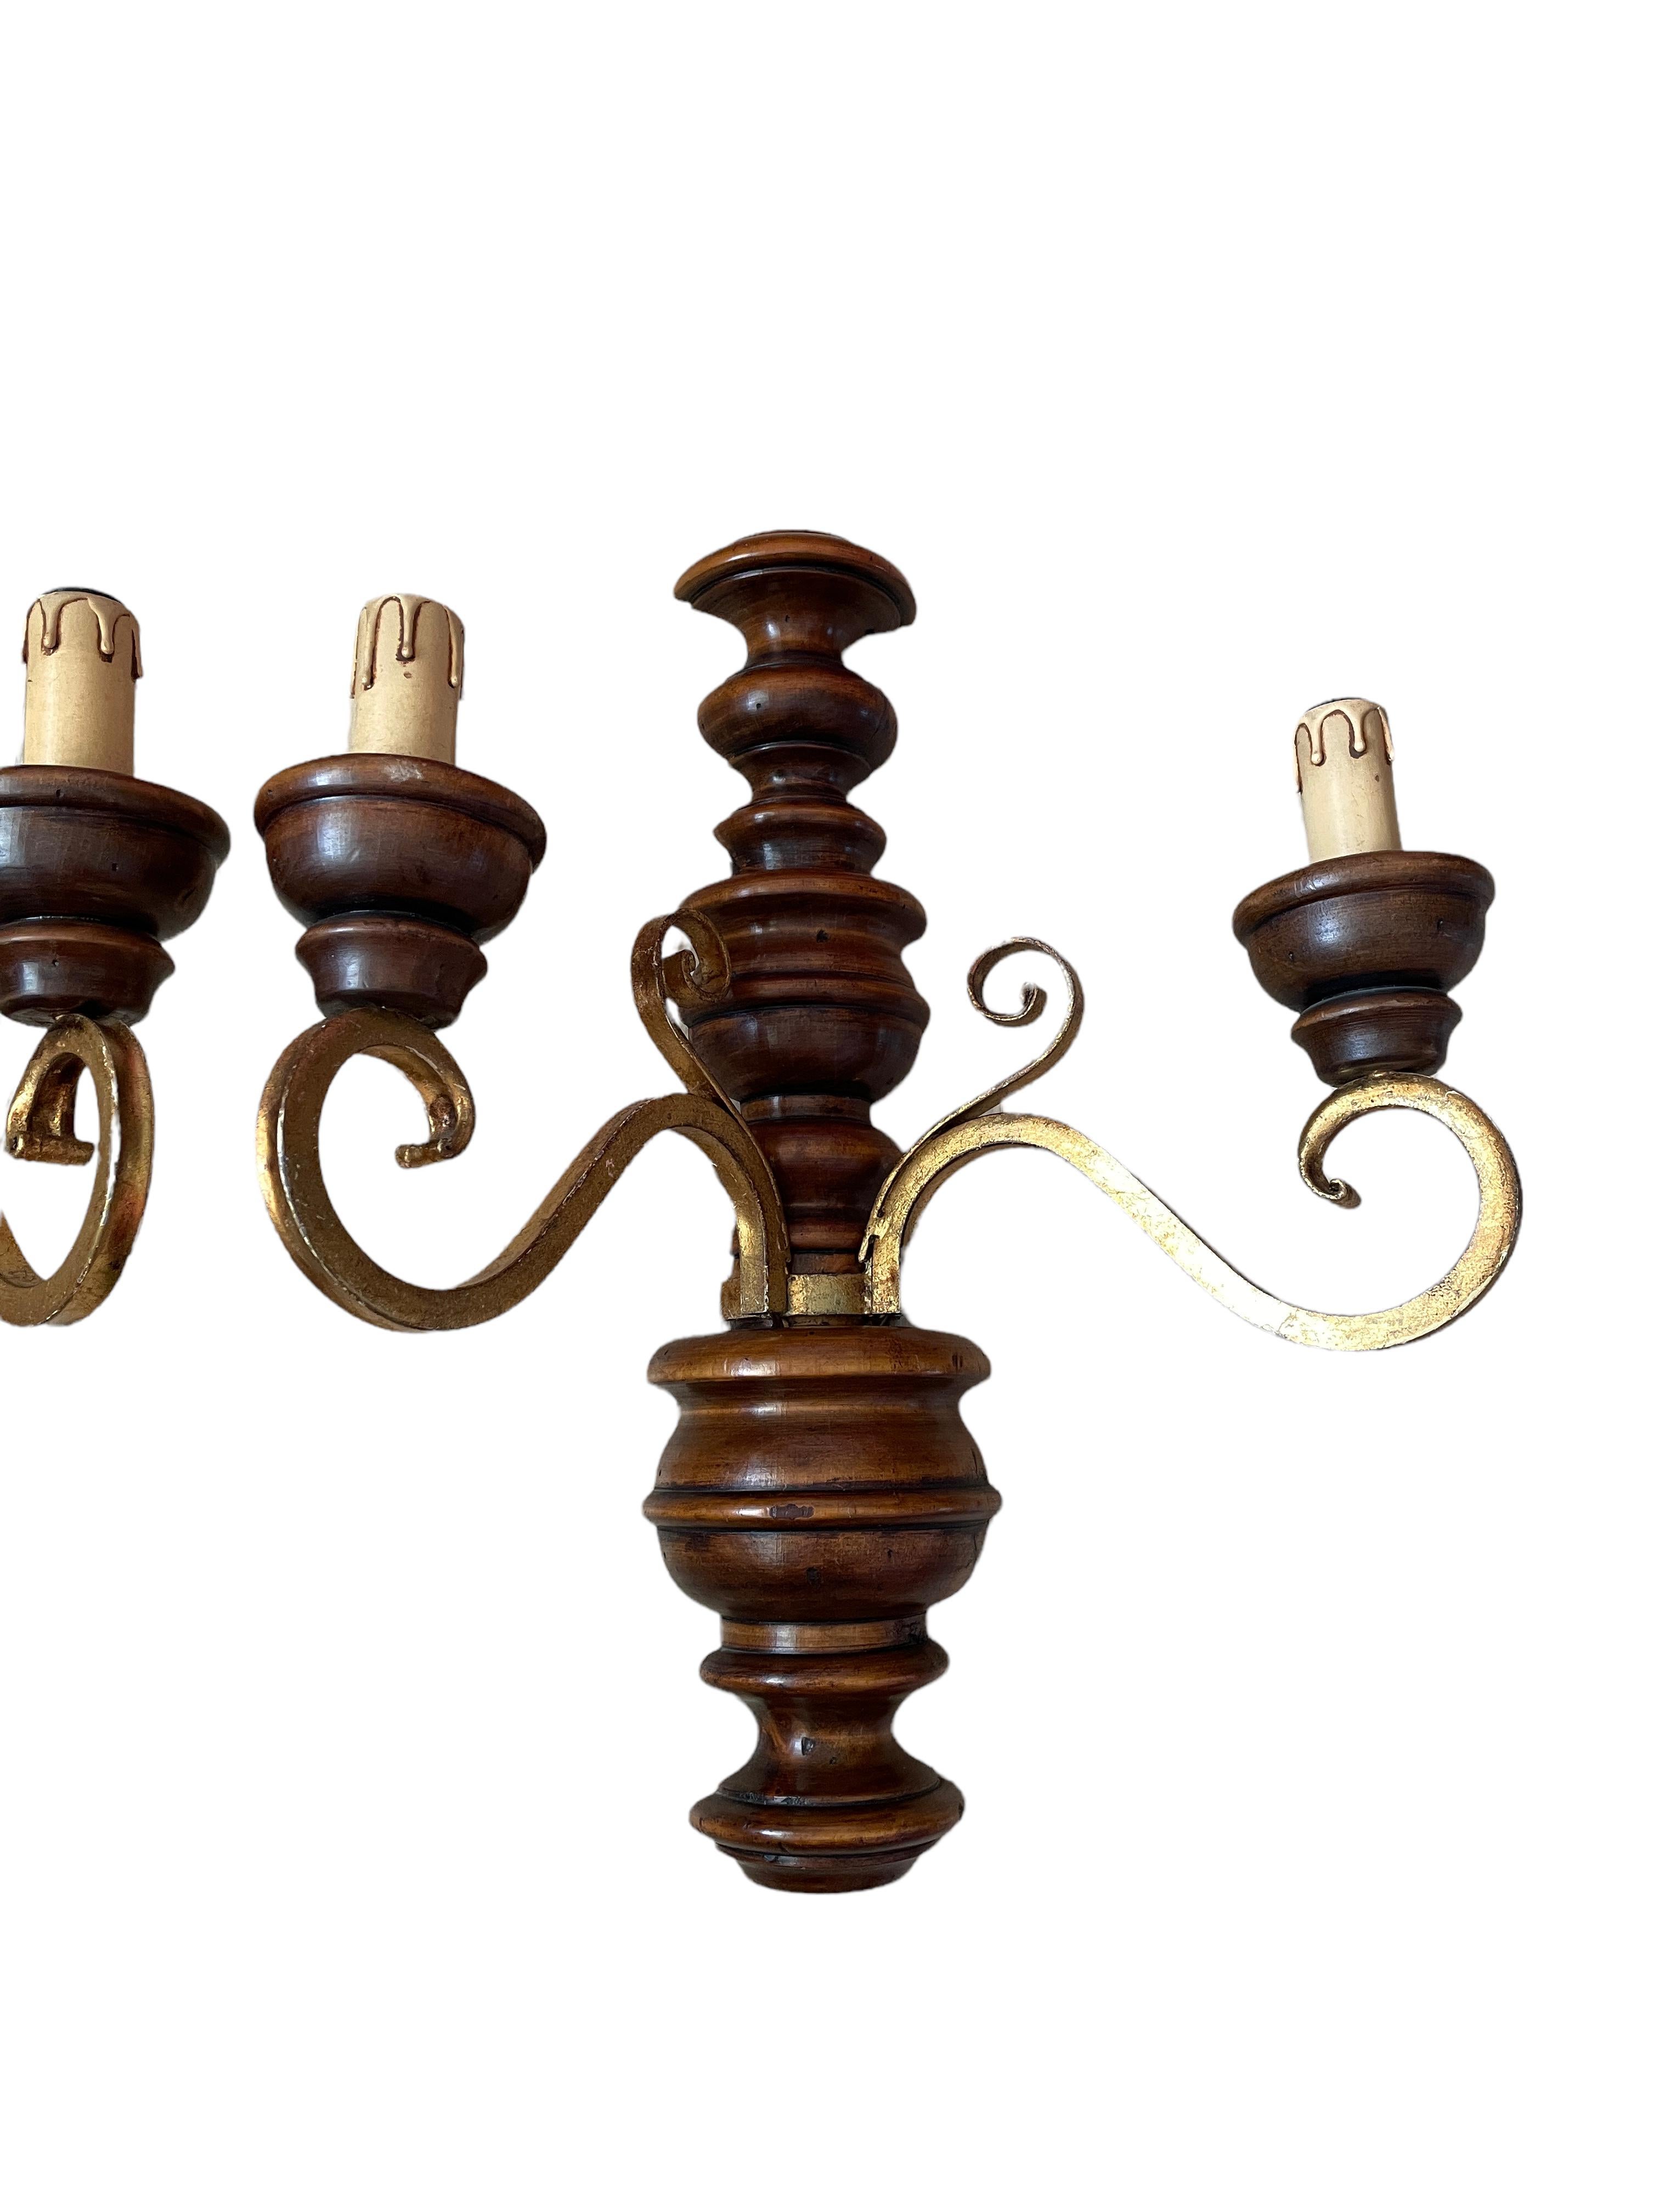 Mid-20th Century Pair of Wood and Gild Rustic Sconces Wood, 1960s, Germany For Sale